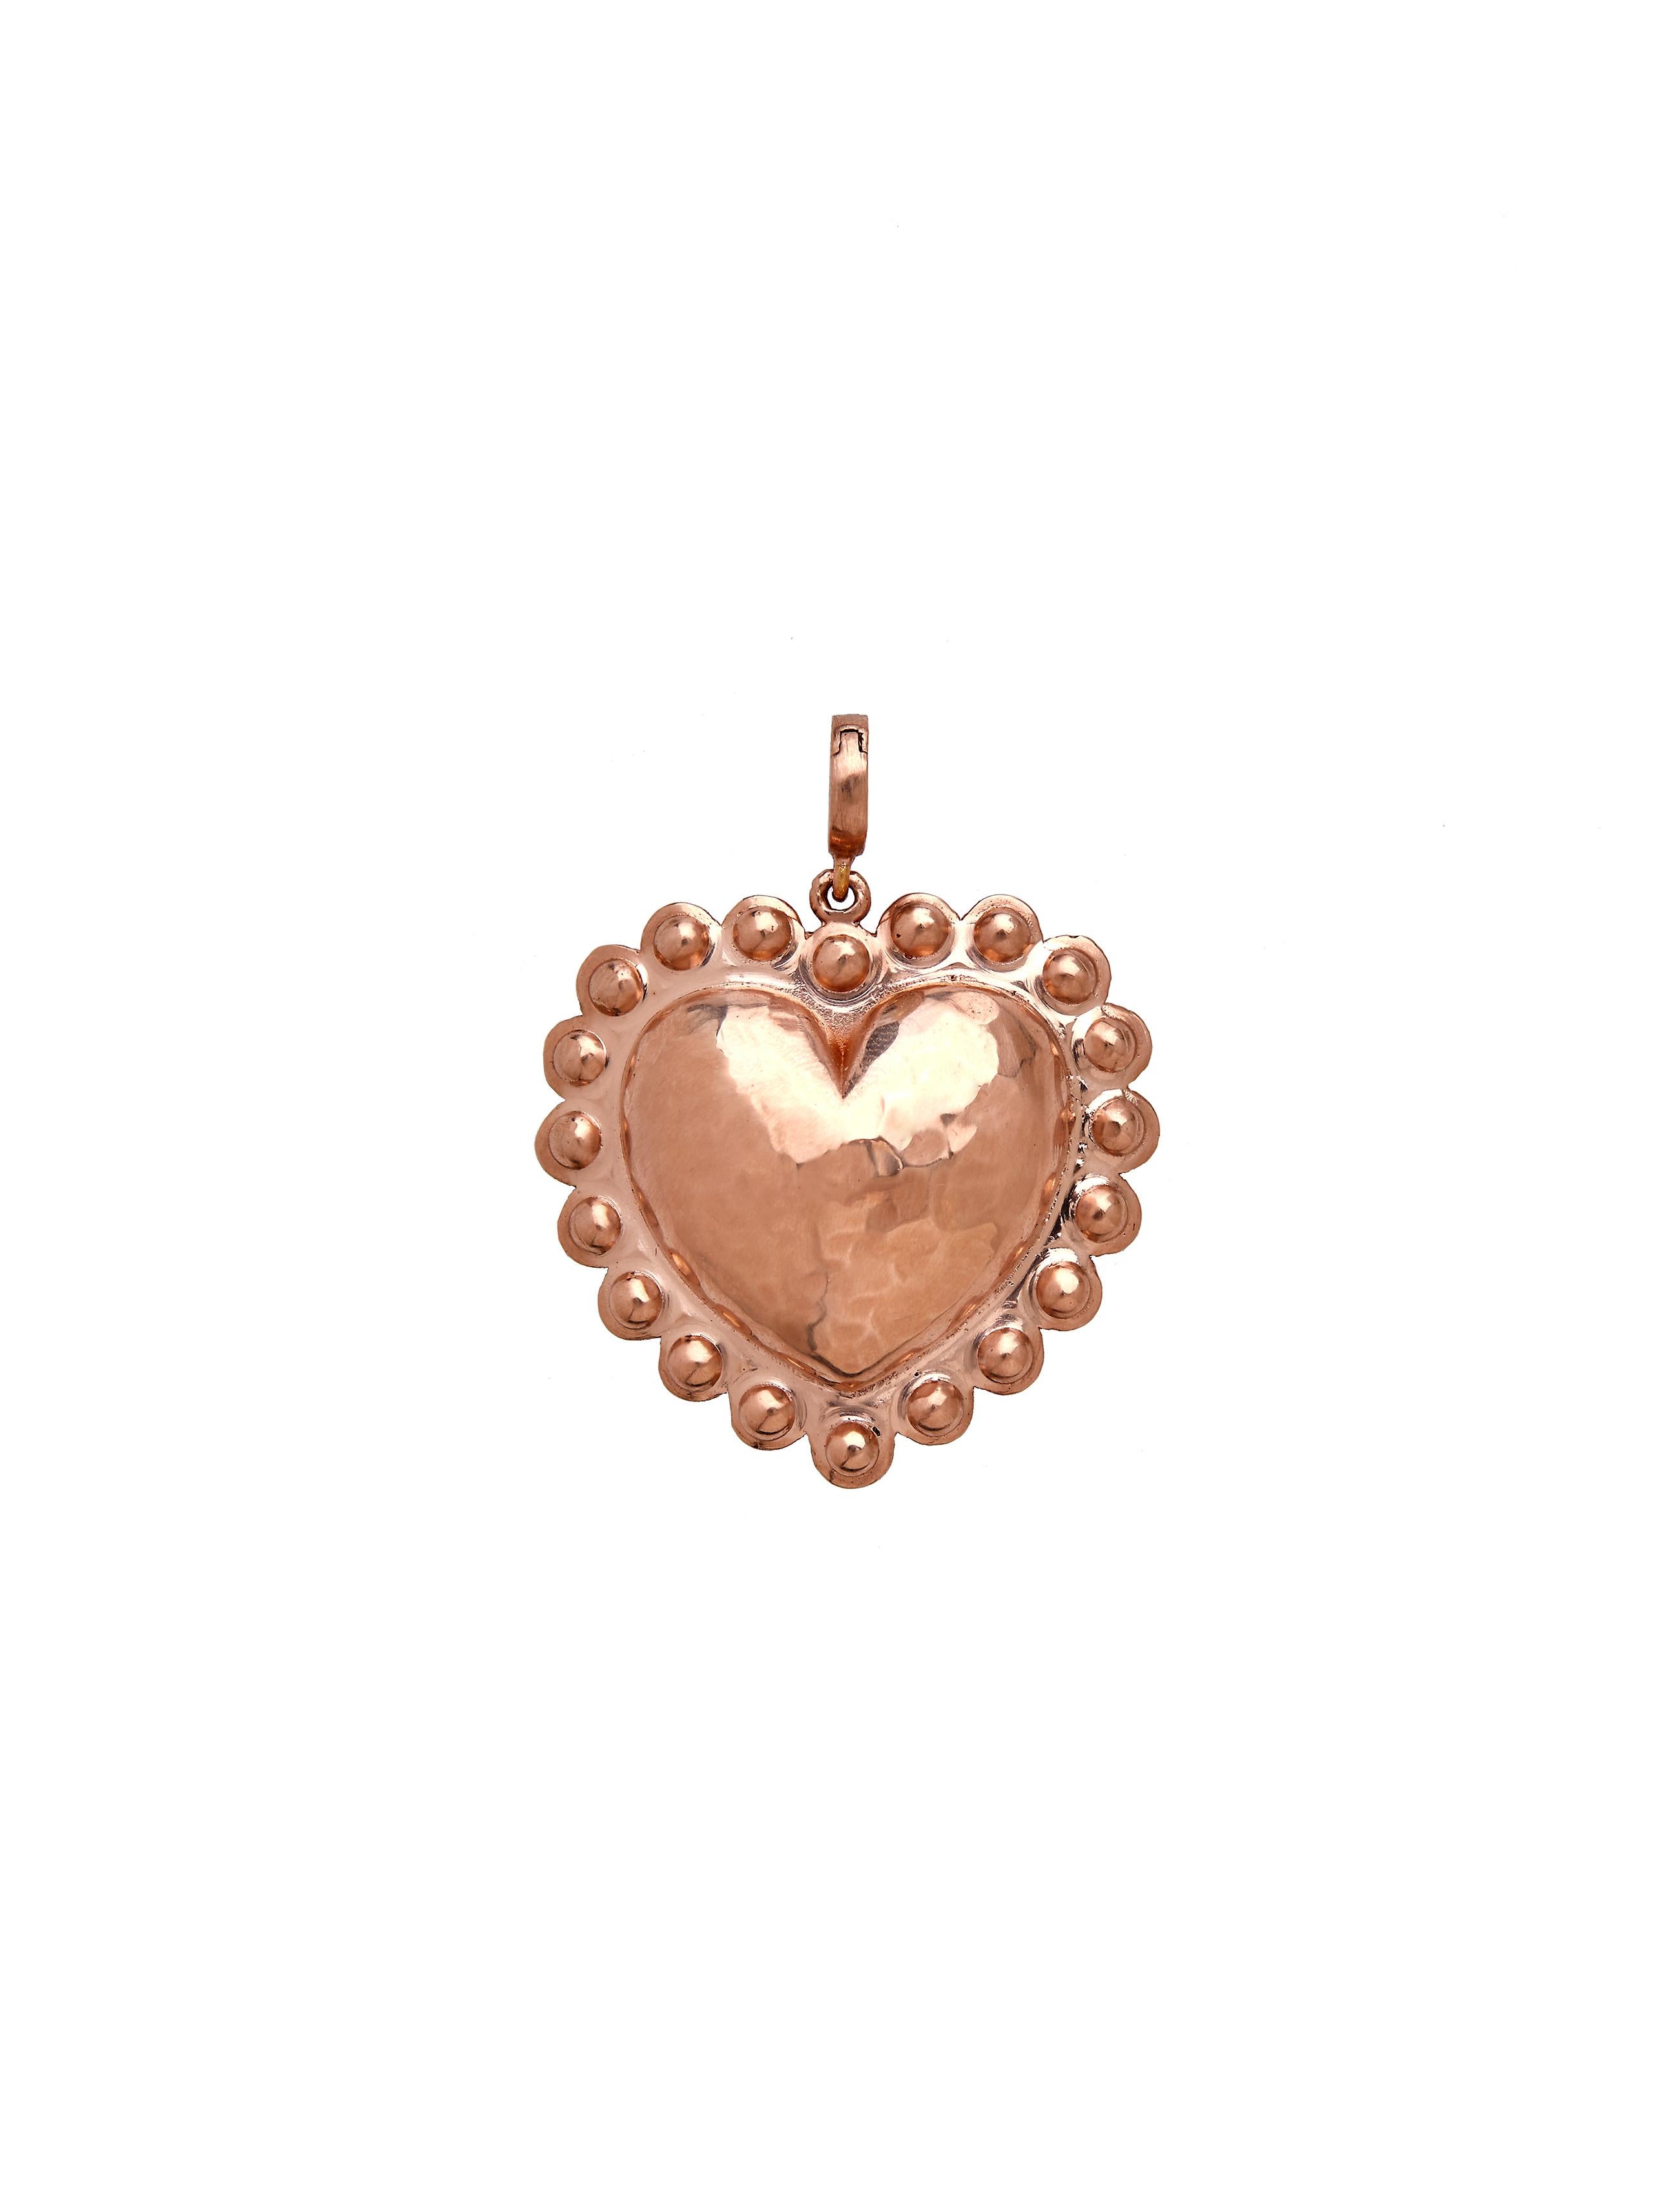 Heart charm deigned by Christina Alexiou. 
This beautiful charm is crafted with 18k yellow gold and made in Greece. The heart is hollow, thus makes it a light-weight everyday piece of jewelry. 
It is available in two colours, yellow and pink 18k